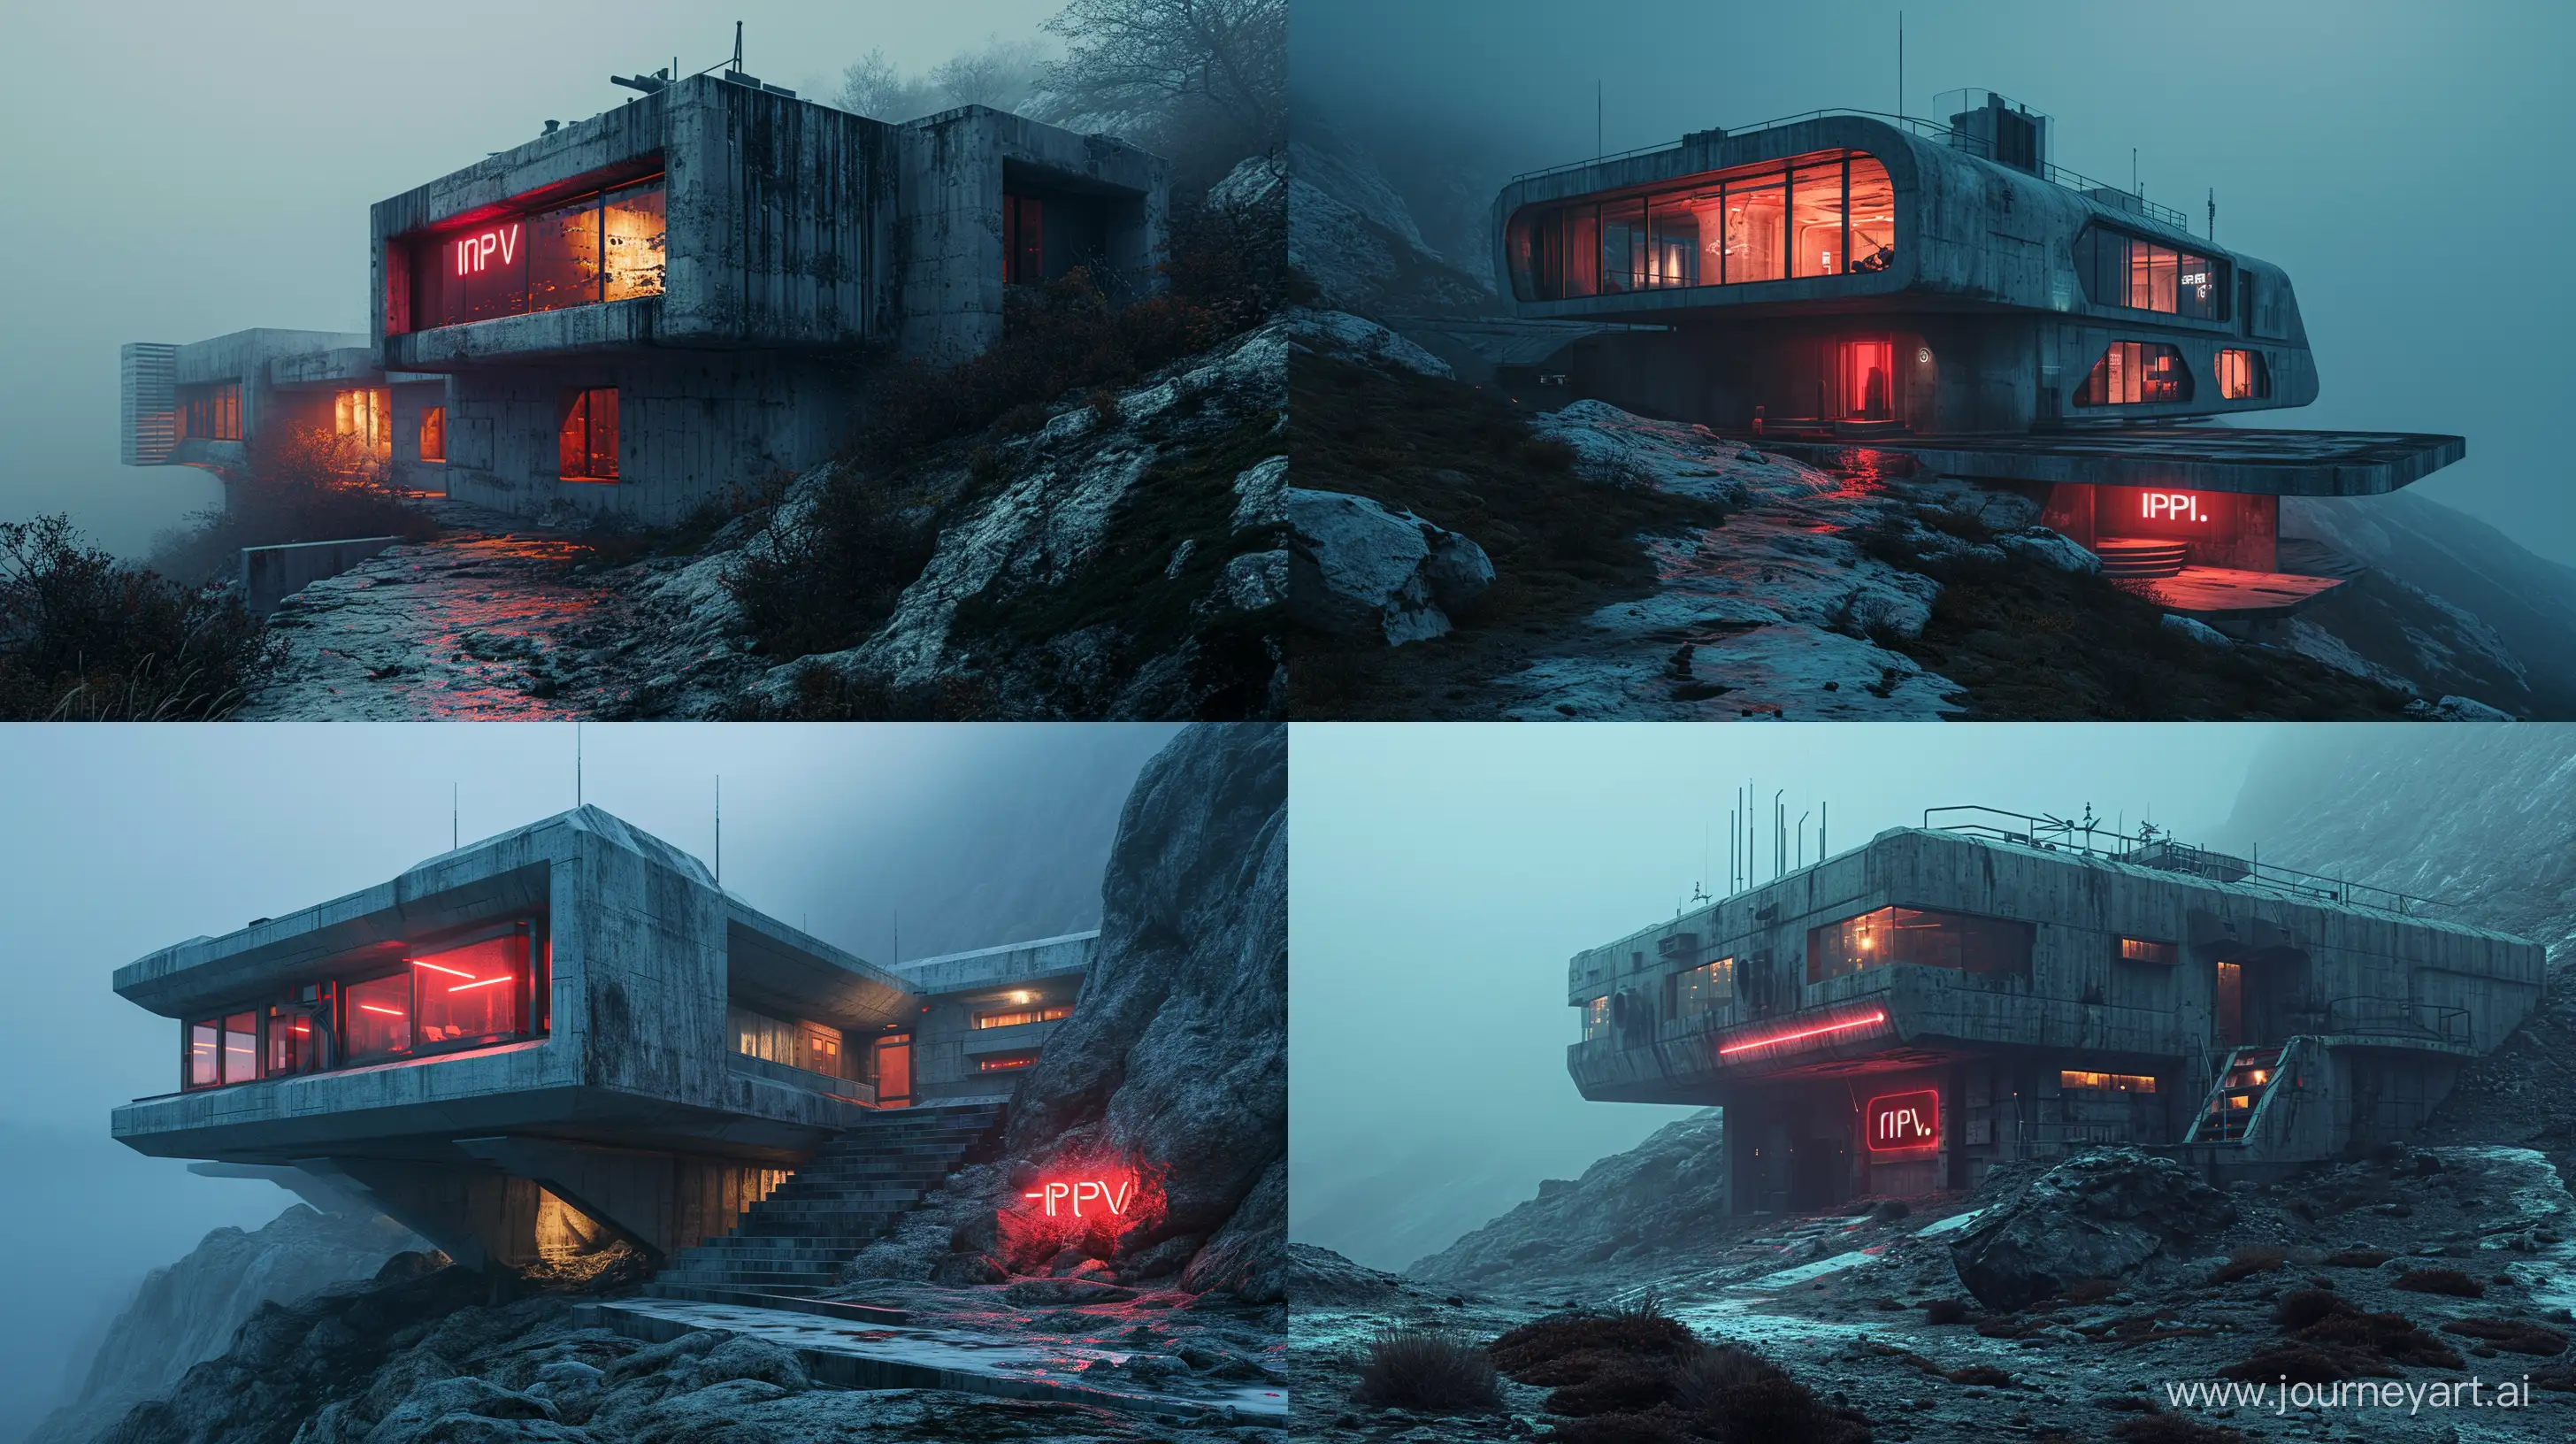 Futuristic-MountainTop-IPTV-Bunker-in-Red-Hues